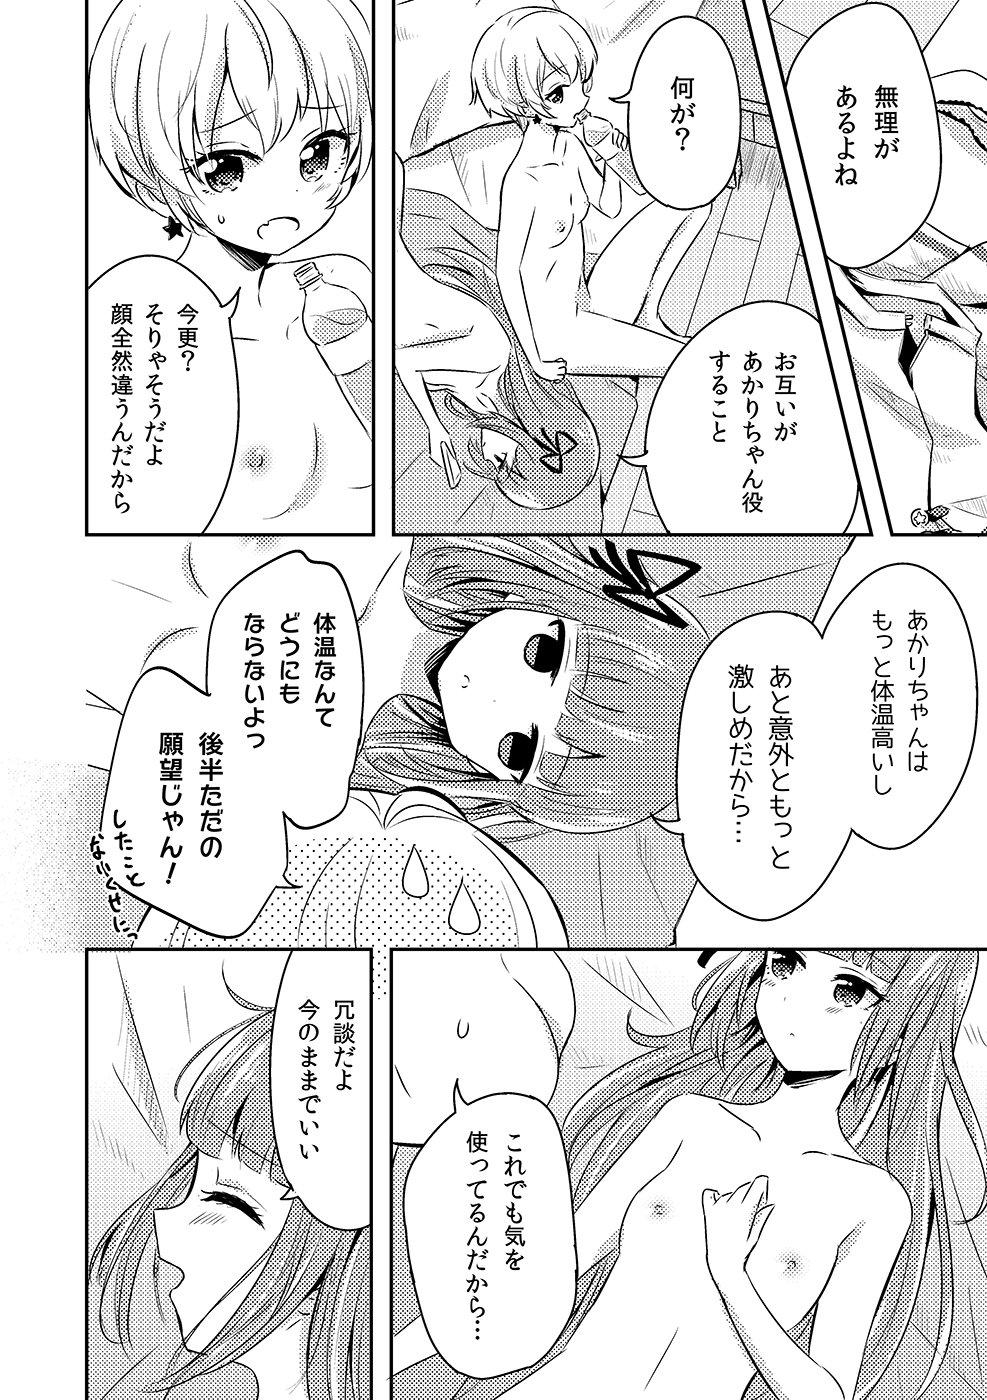 Large Who contributed to loveless sex joint two years ago! Yuusumi manga. - Aikatsu Whores - Picture 2